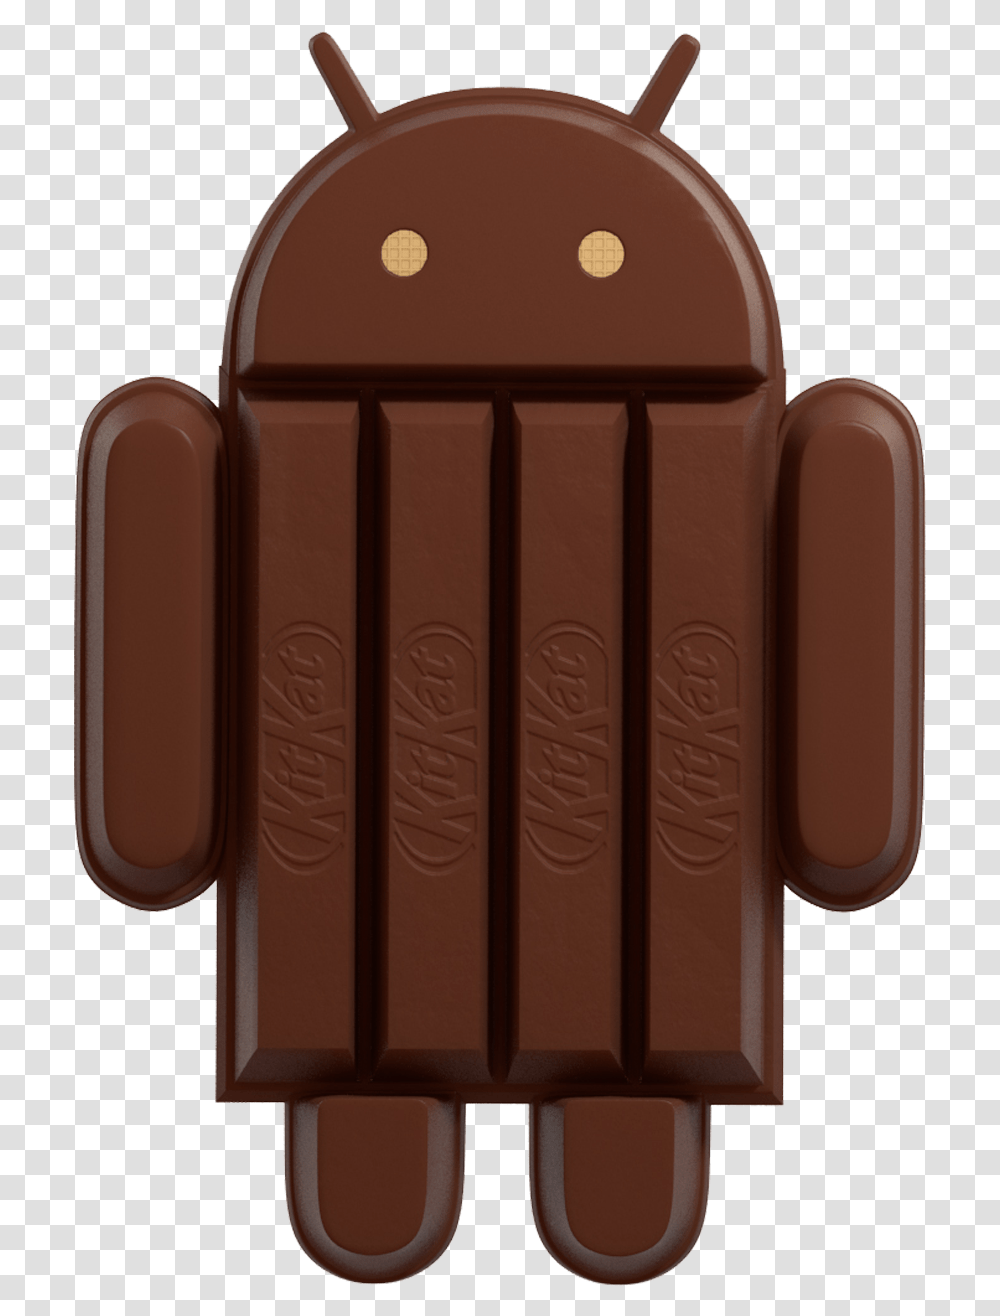 Kitkat Android Kitkat, Sweets, Food, Confectionery, Chocolate Transparent Png